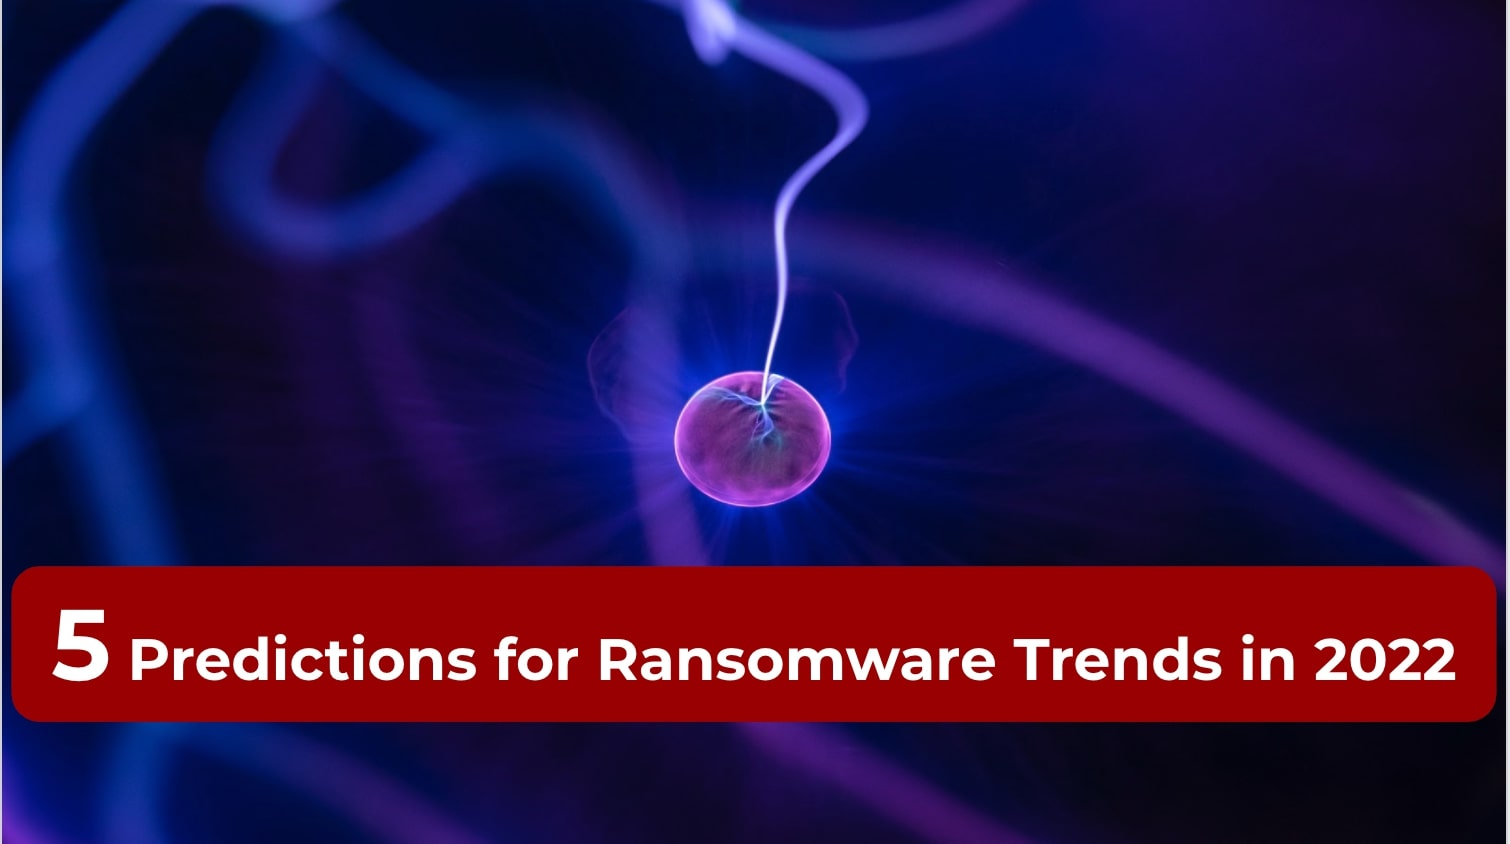 5 Predictions for Ransomware Trends in 2022